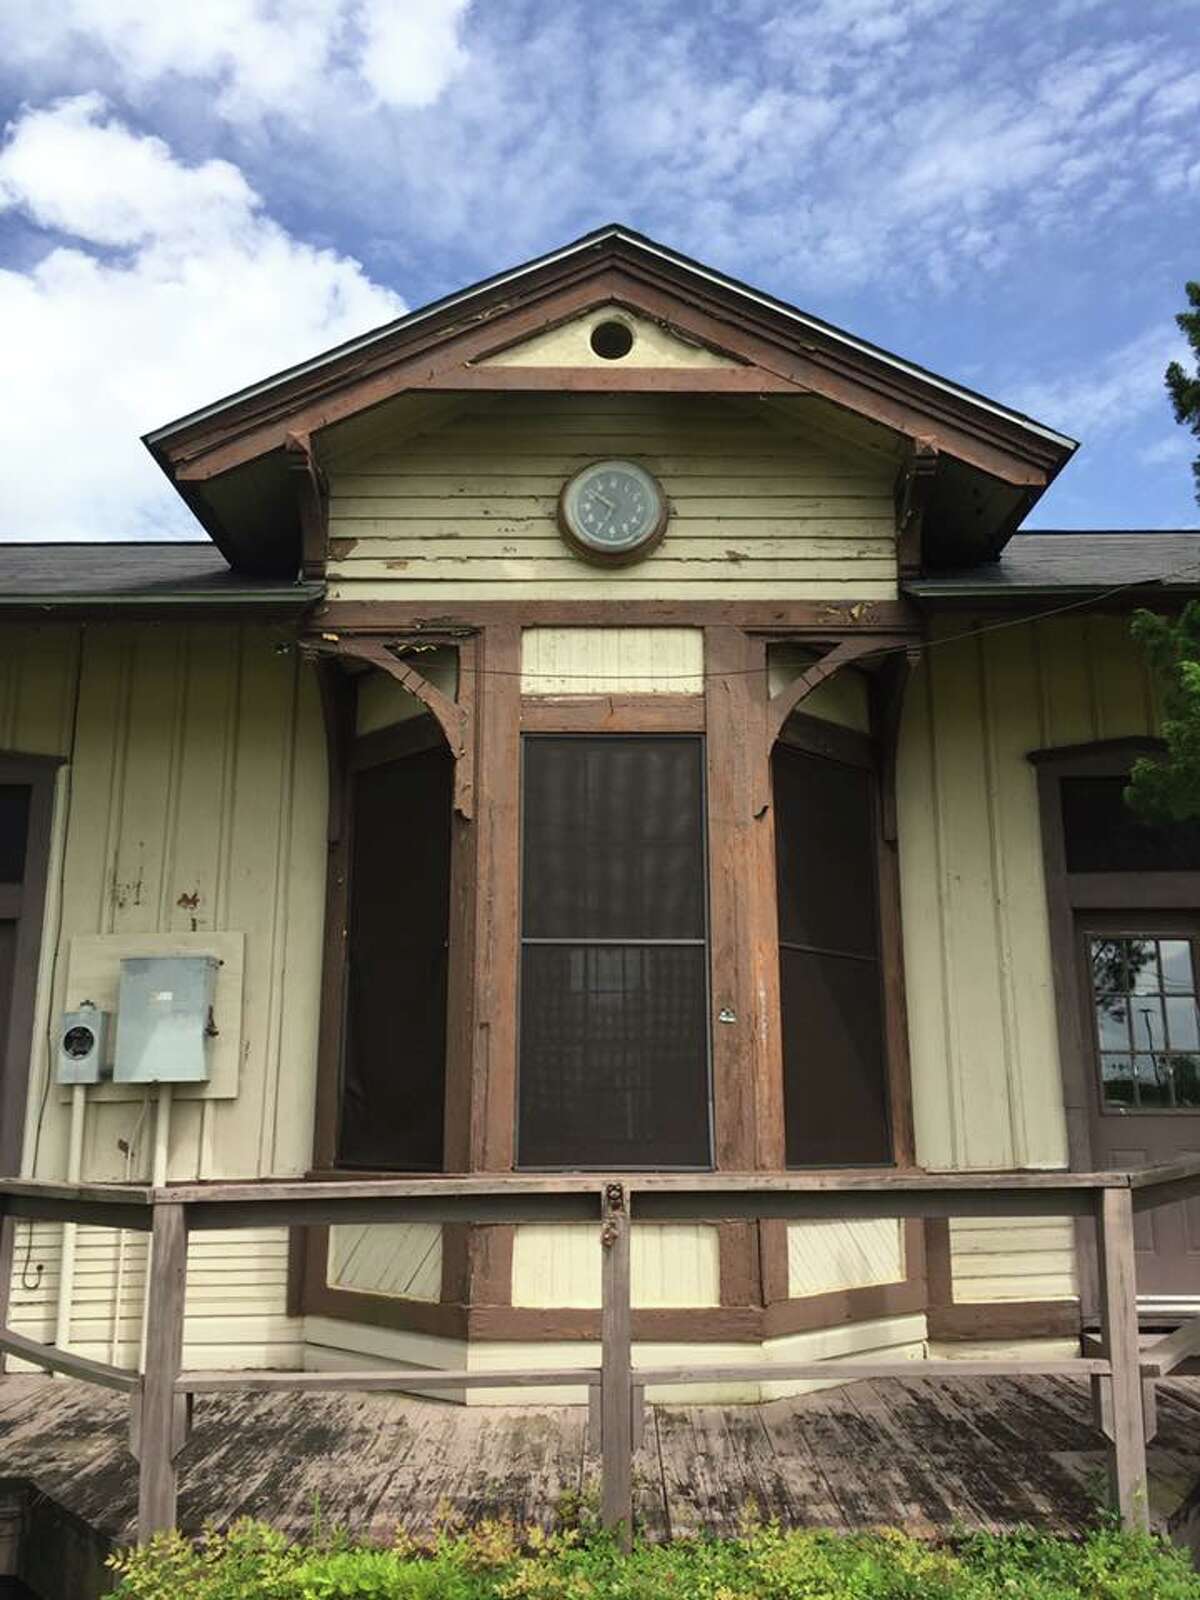 The depot, now at 3501 Liberty Drive, is Pearland's oldest structure. It was built  between 1896 and 1900 by the Southern Homestead Co., and later taken over by the Santa Fe Railroad.